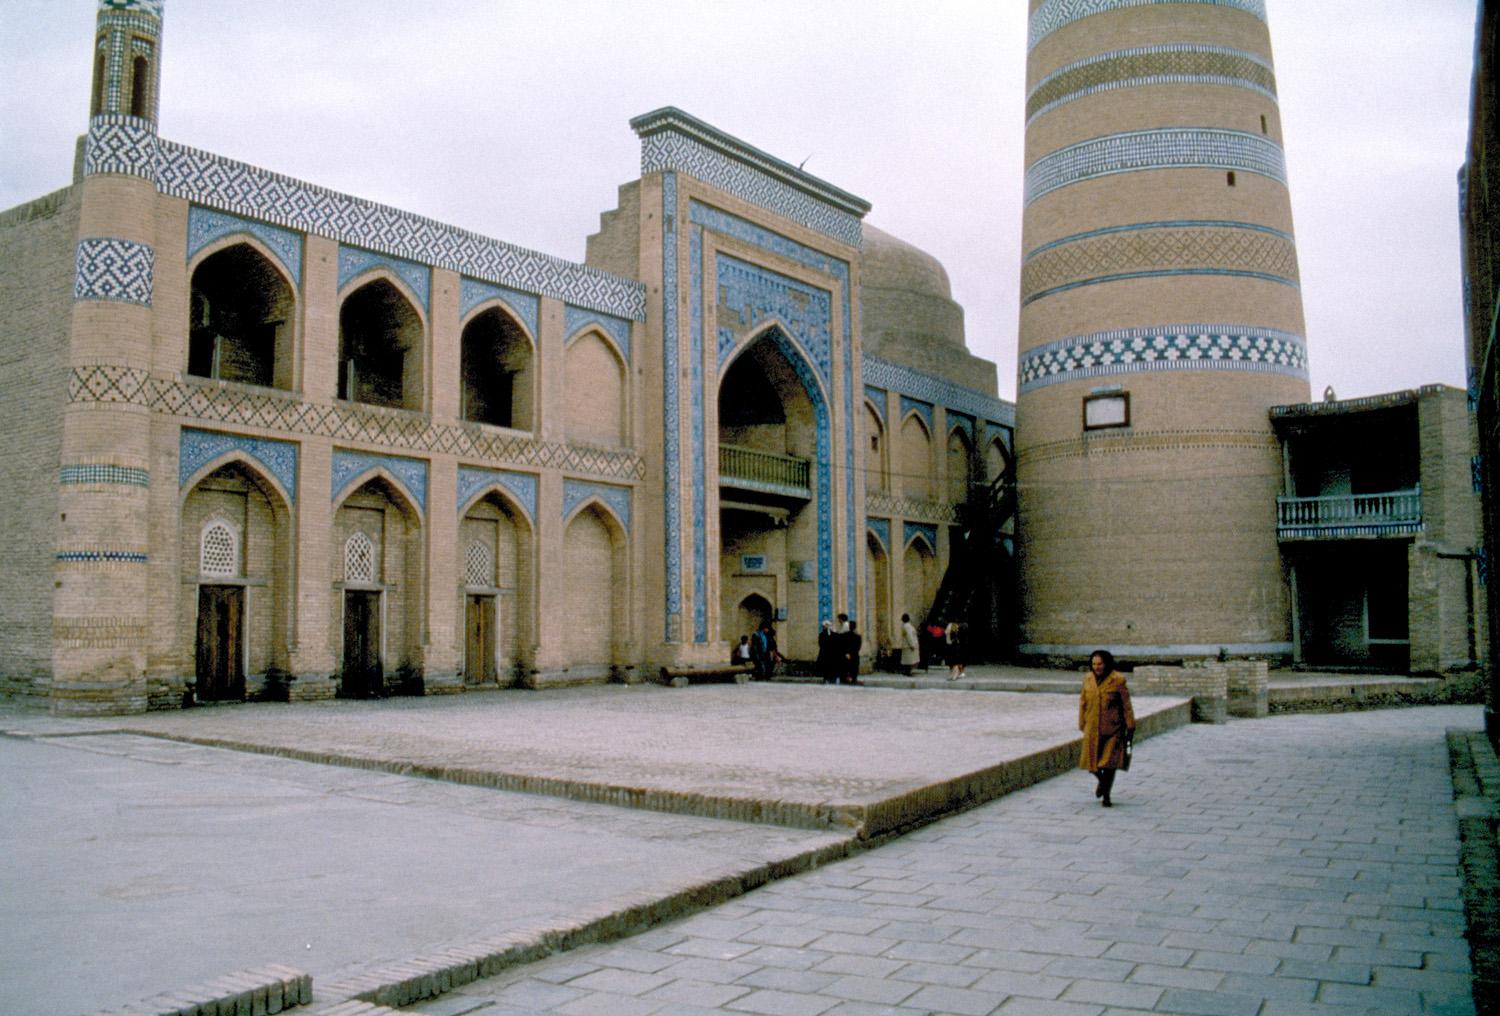 Exterior view of the main façade with the base of the minaret